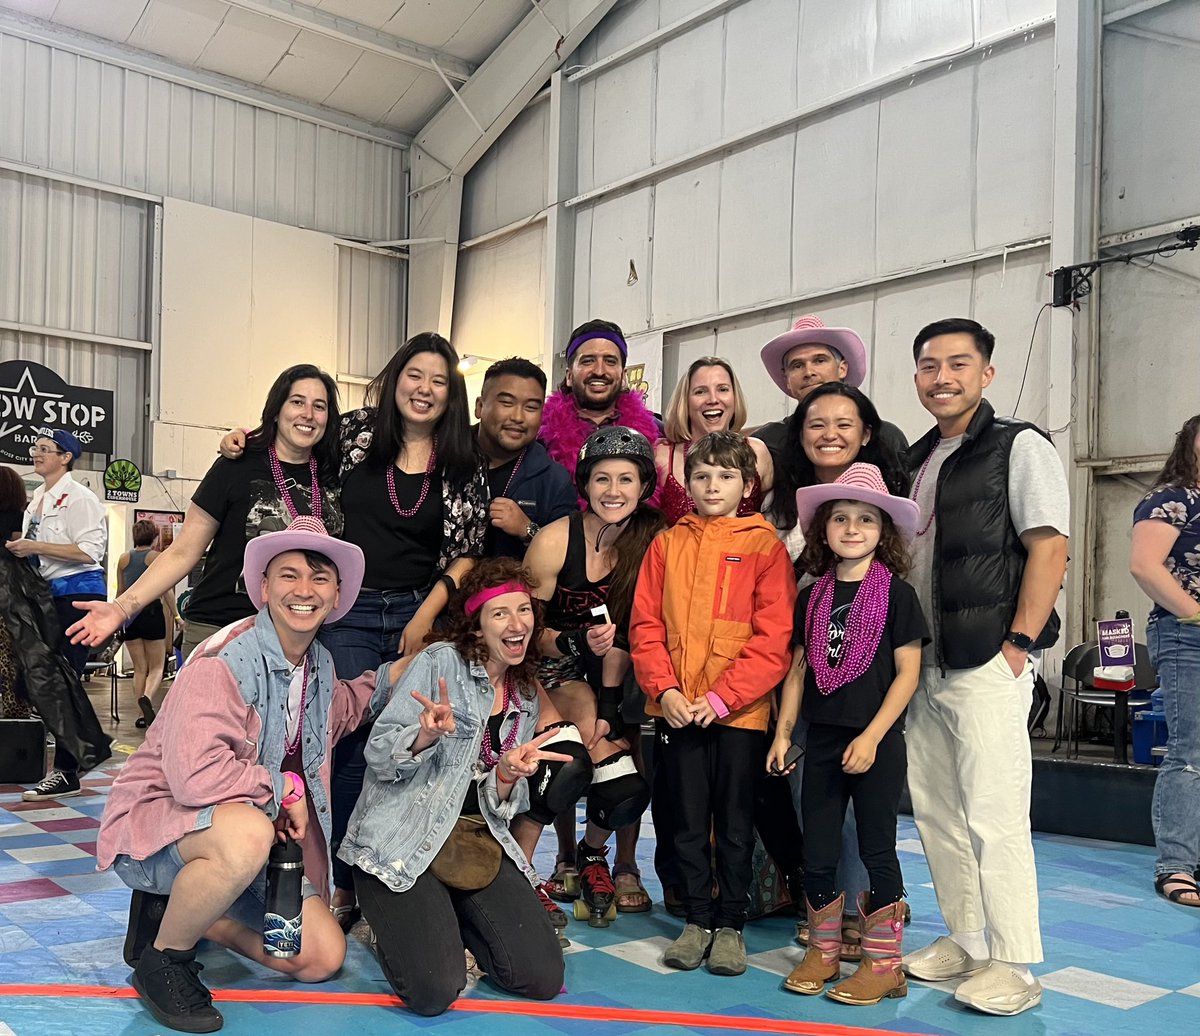 A fun photo of our residents and attendings supporting our very own CA-2, Dr. Avery Barron as she competed alongside her roller derby team, Guns N' Rollers, in their championship game!   #OHSU #OHSUAPOM #OHSUanesthesia #rollerderby #OHSUresidents #residents #anesthesiologist